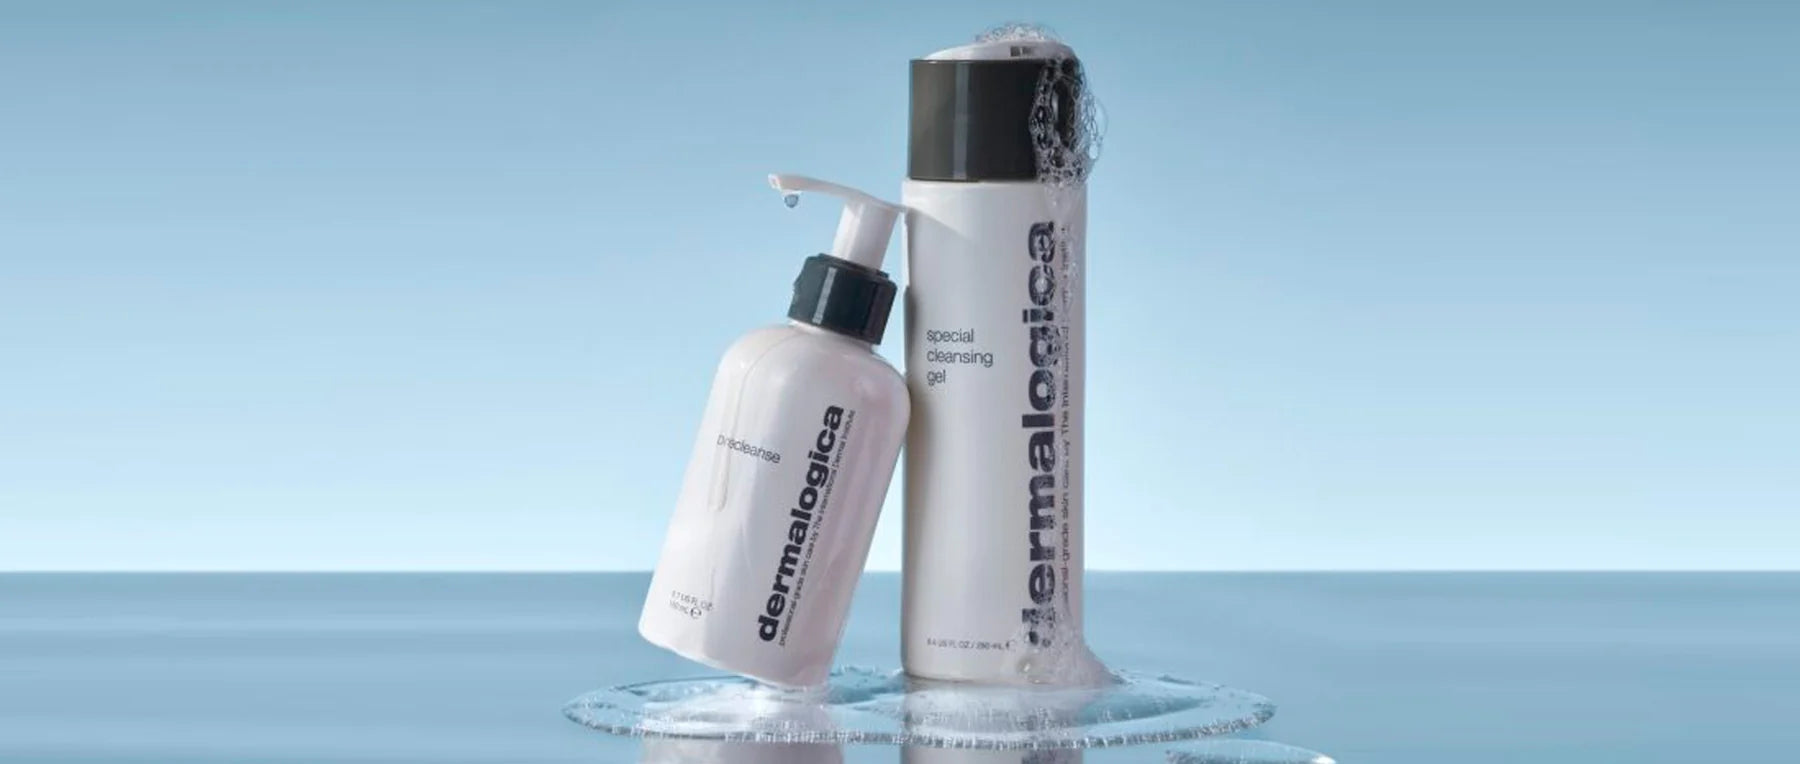 The guide to dermalogica cleansers: how to choose the right one for your skin